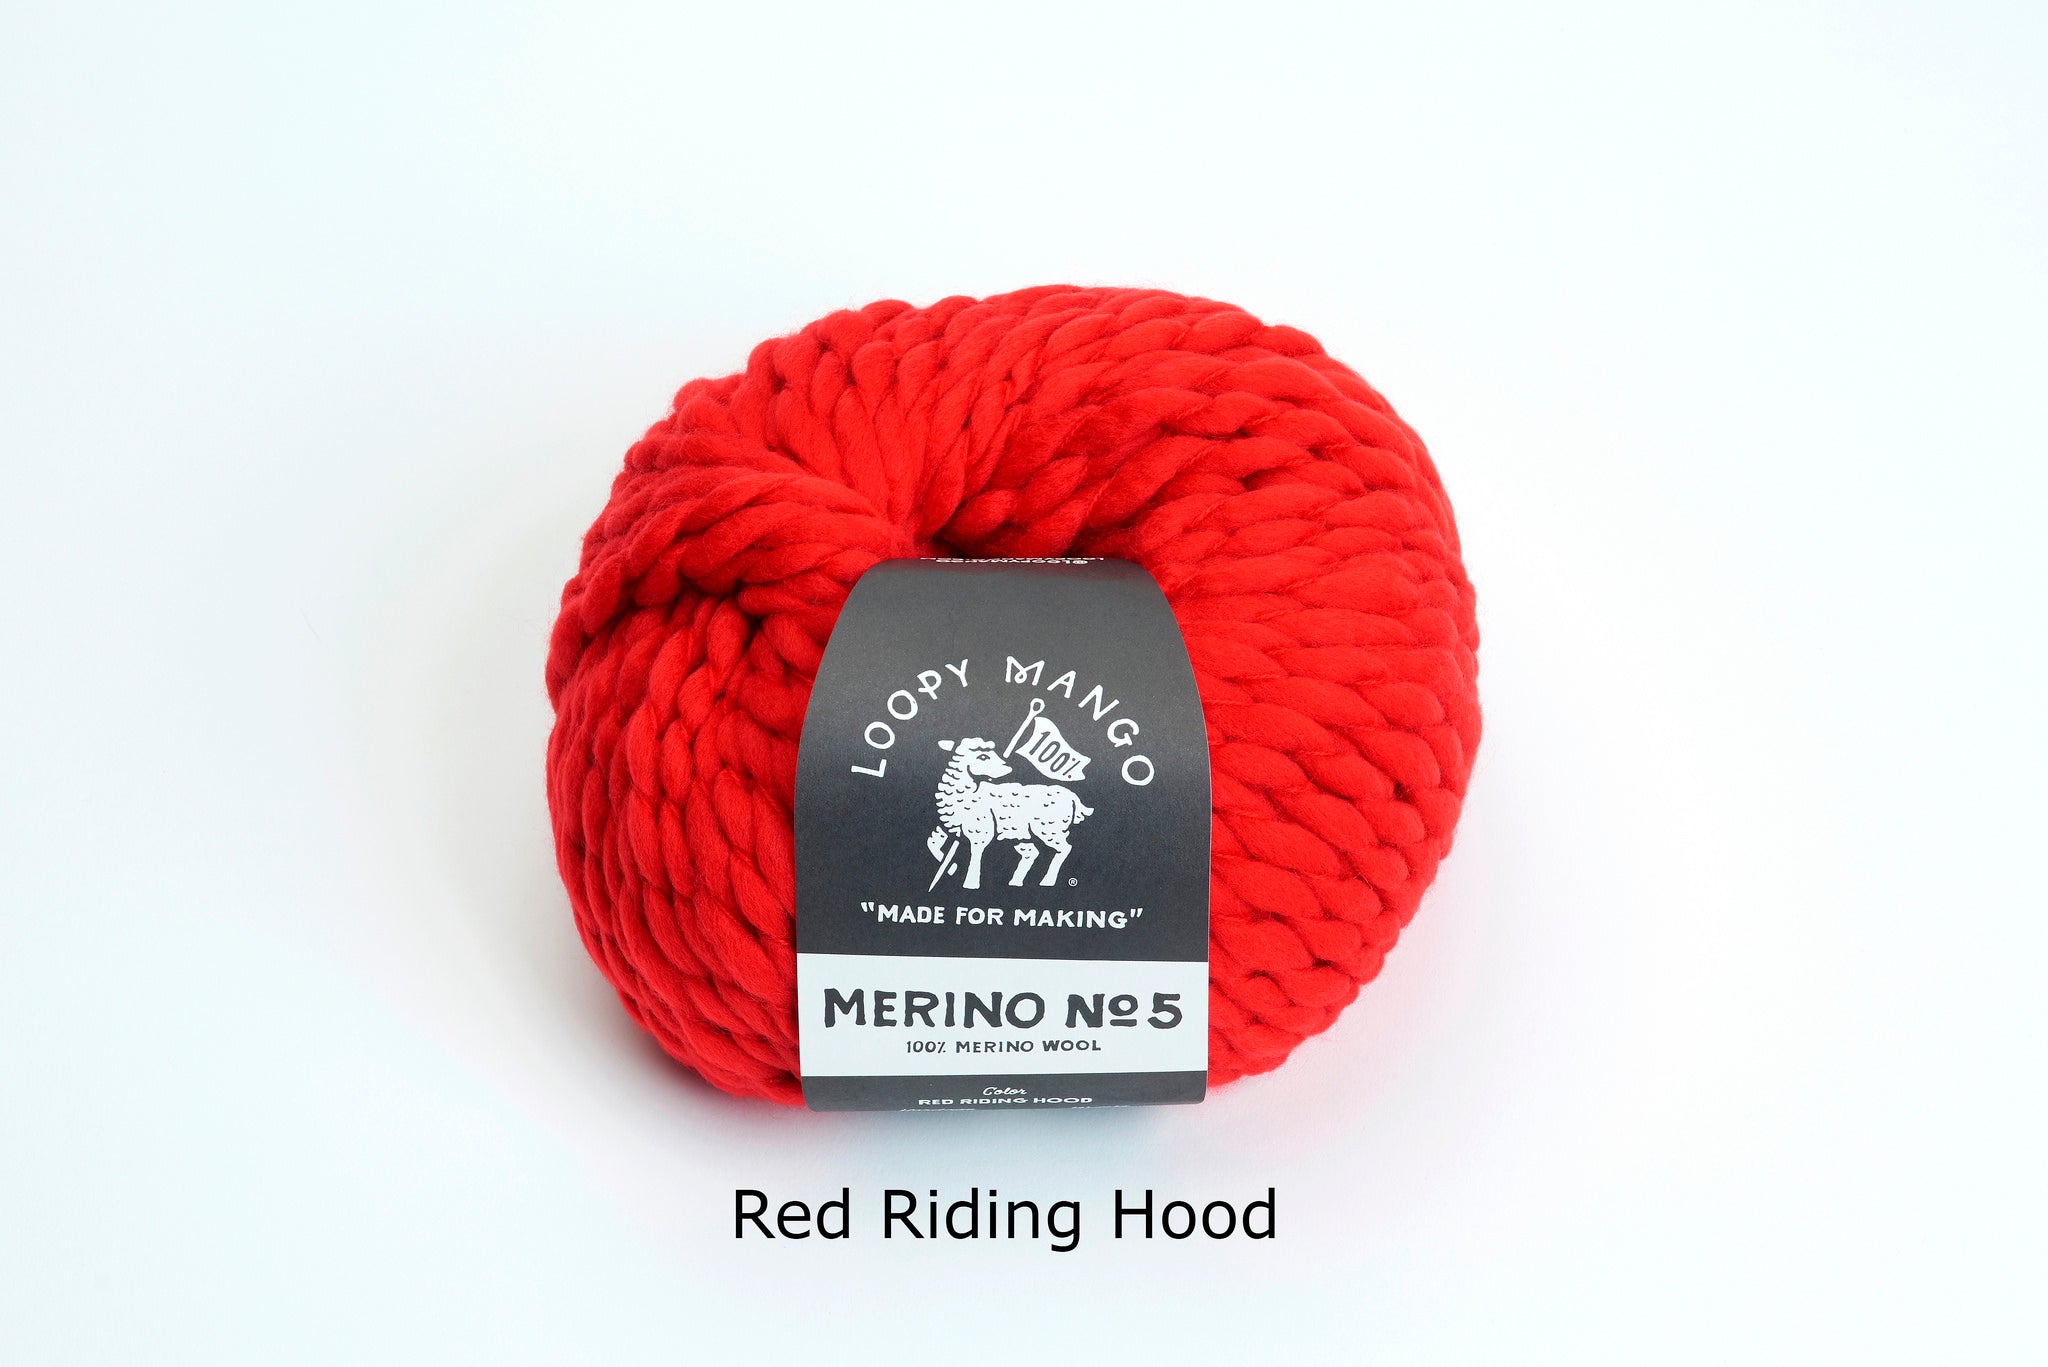 Super Chunky Bulky Merino Wool | Best Yarn for Learning How to